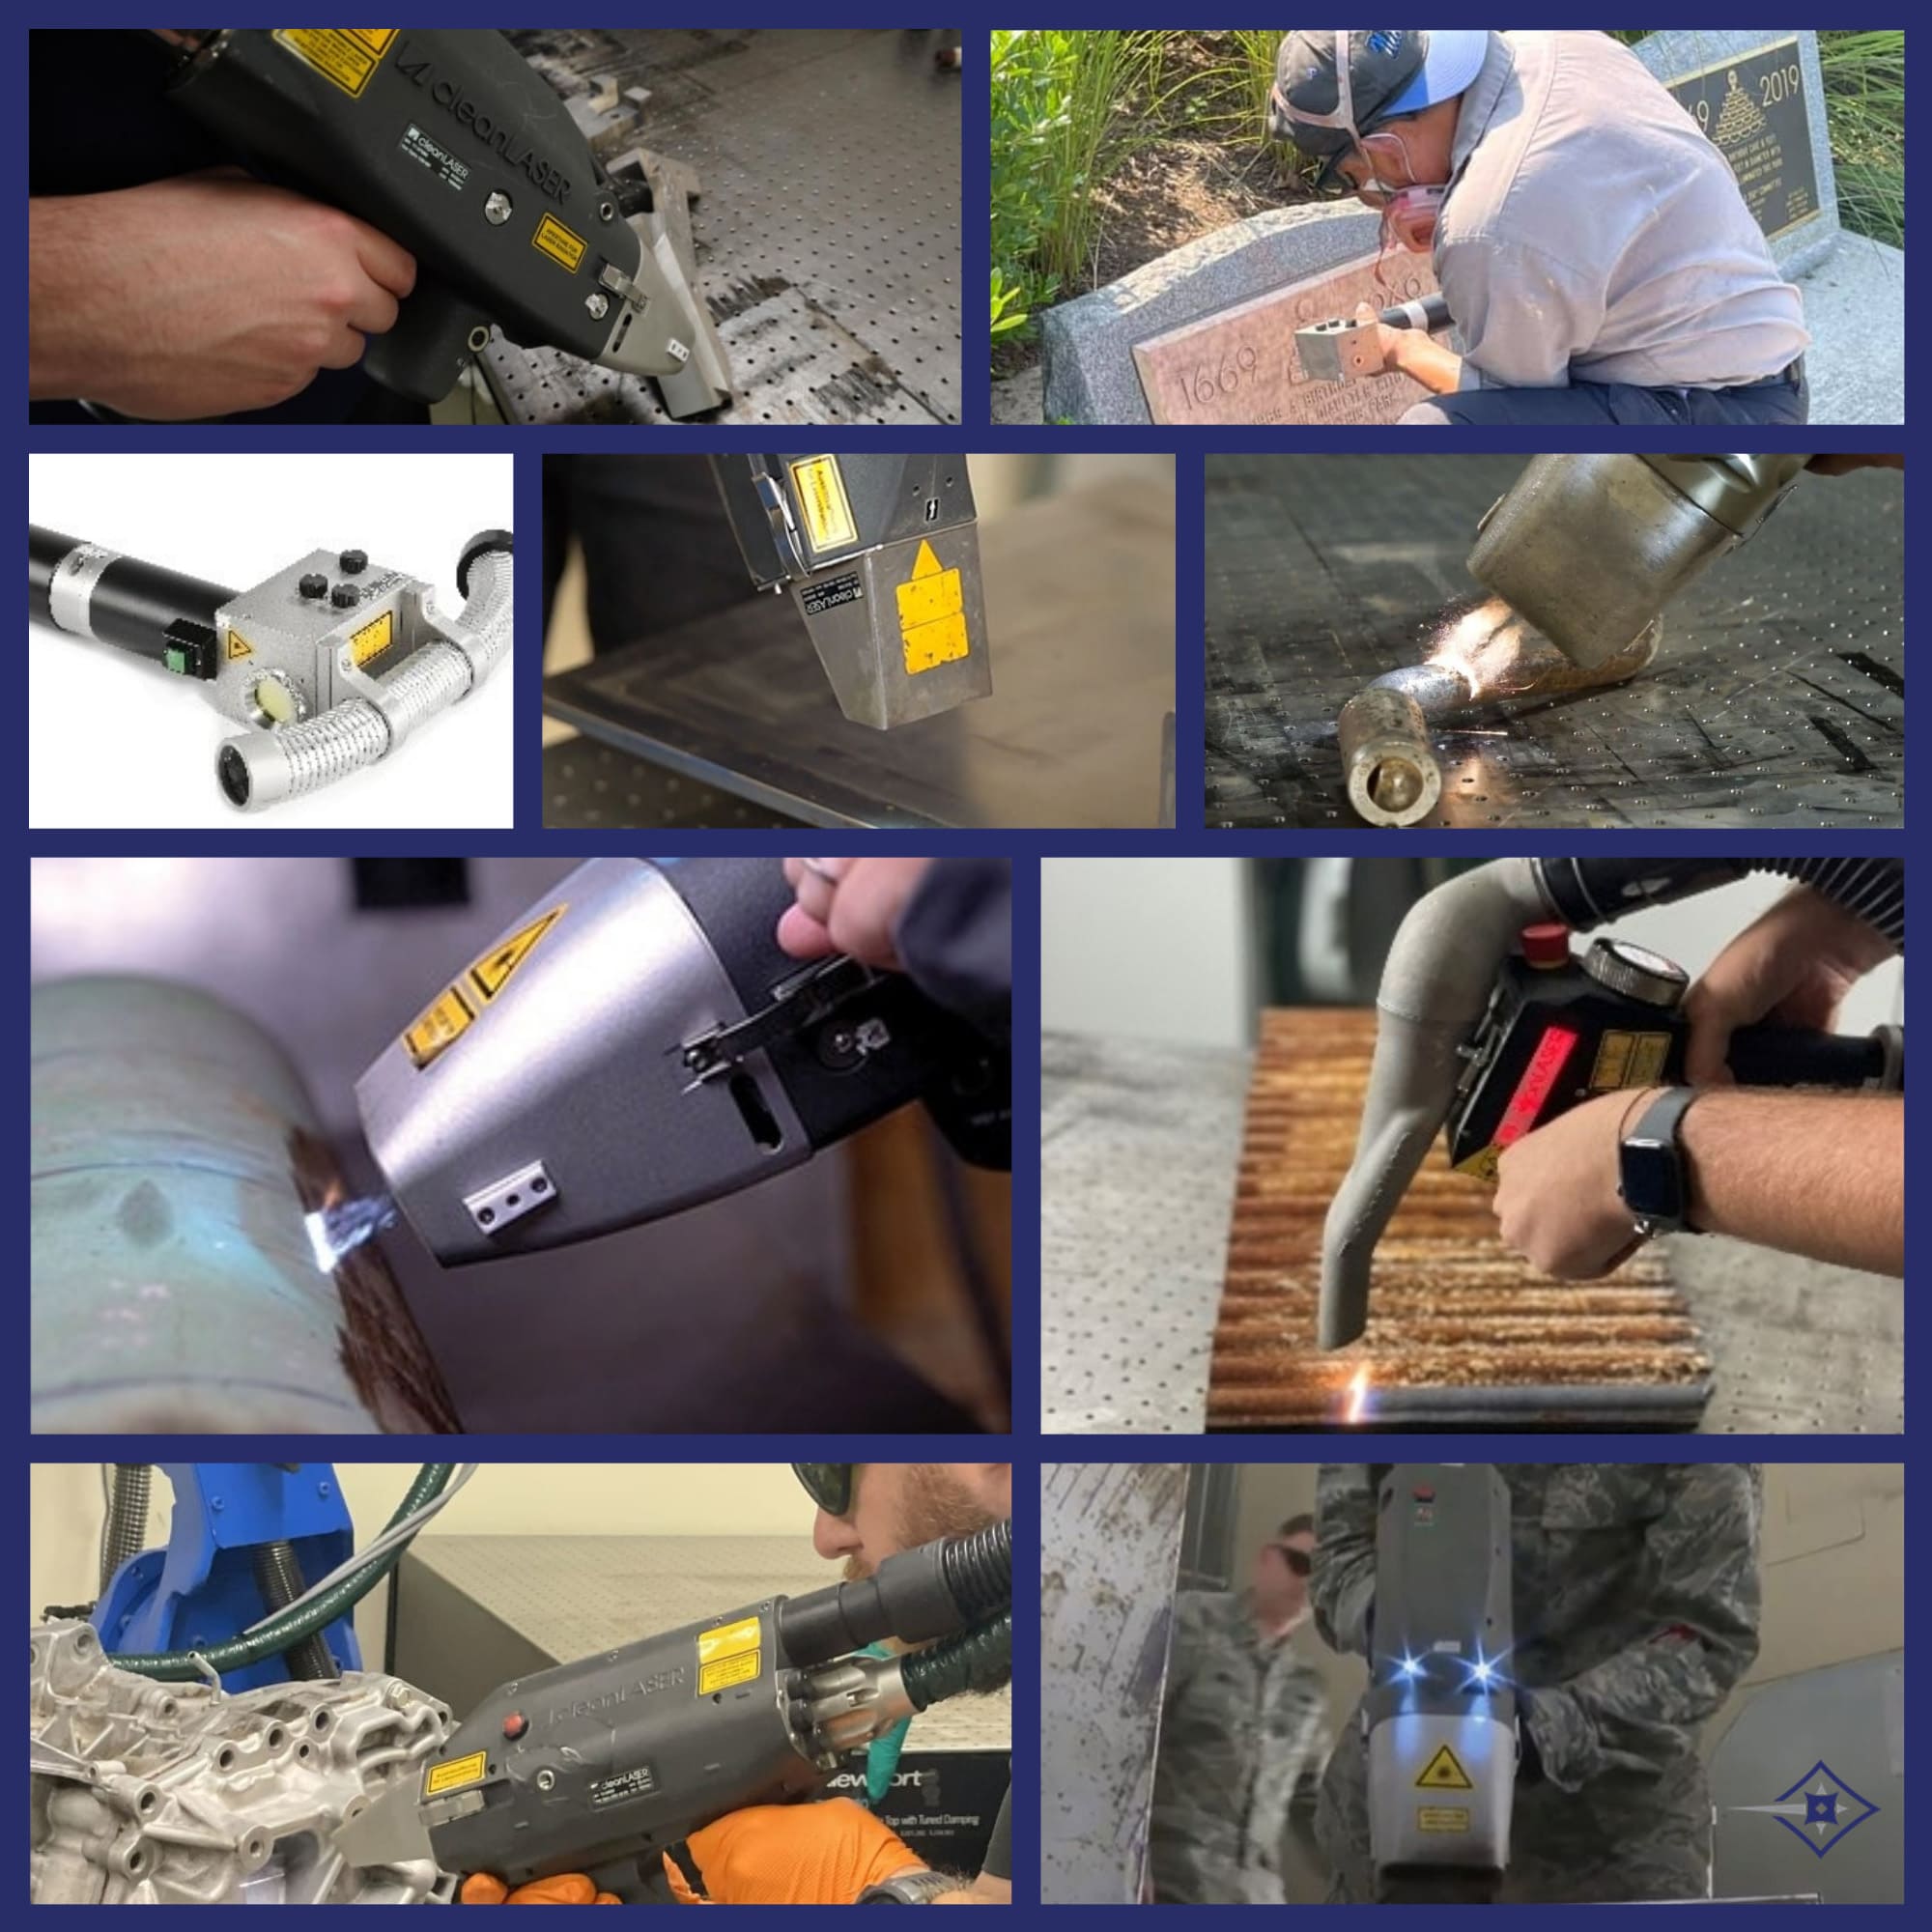 Collage of 1D Handheld Laser Cleaning Optics